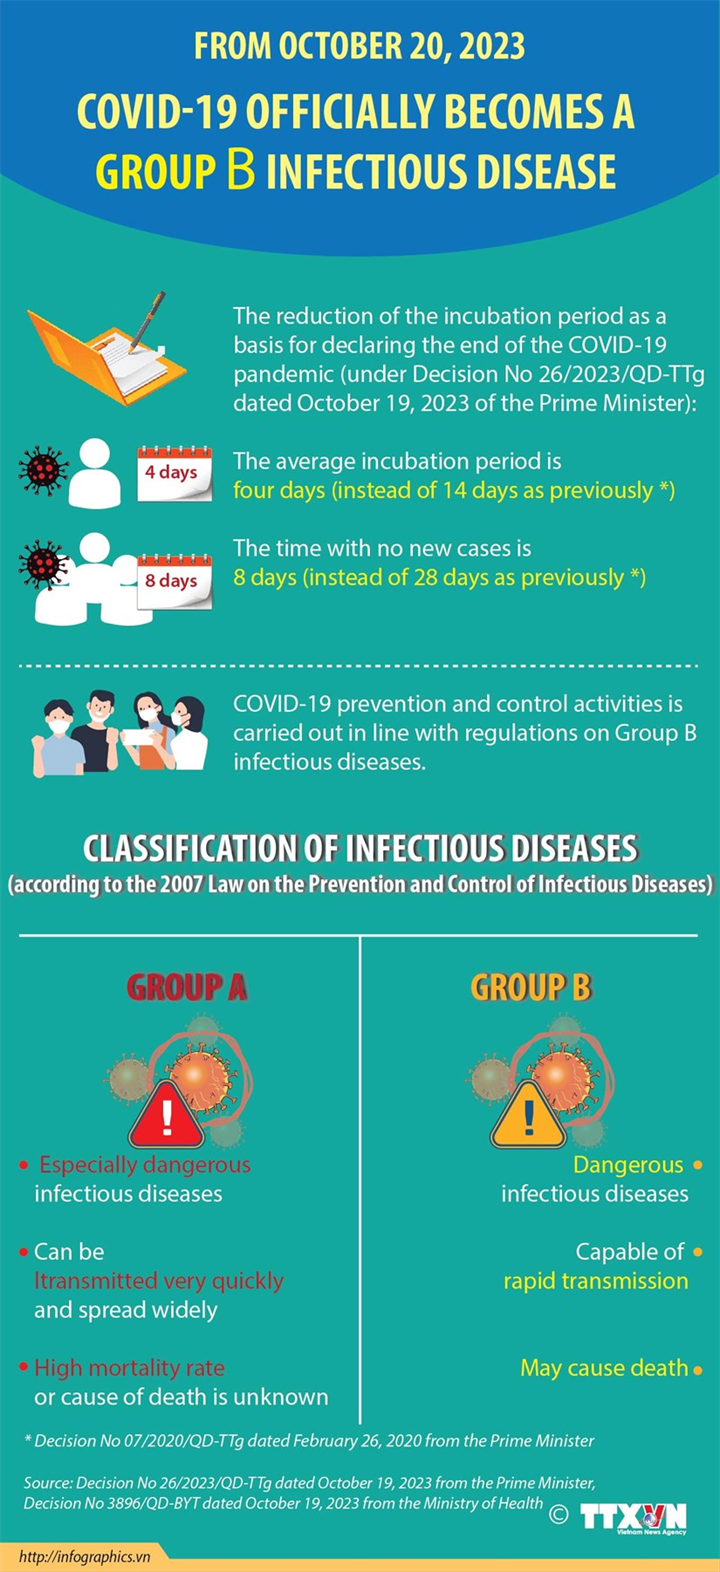 COVID-19 officially becomes Group B infectious disease